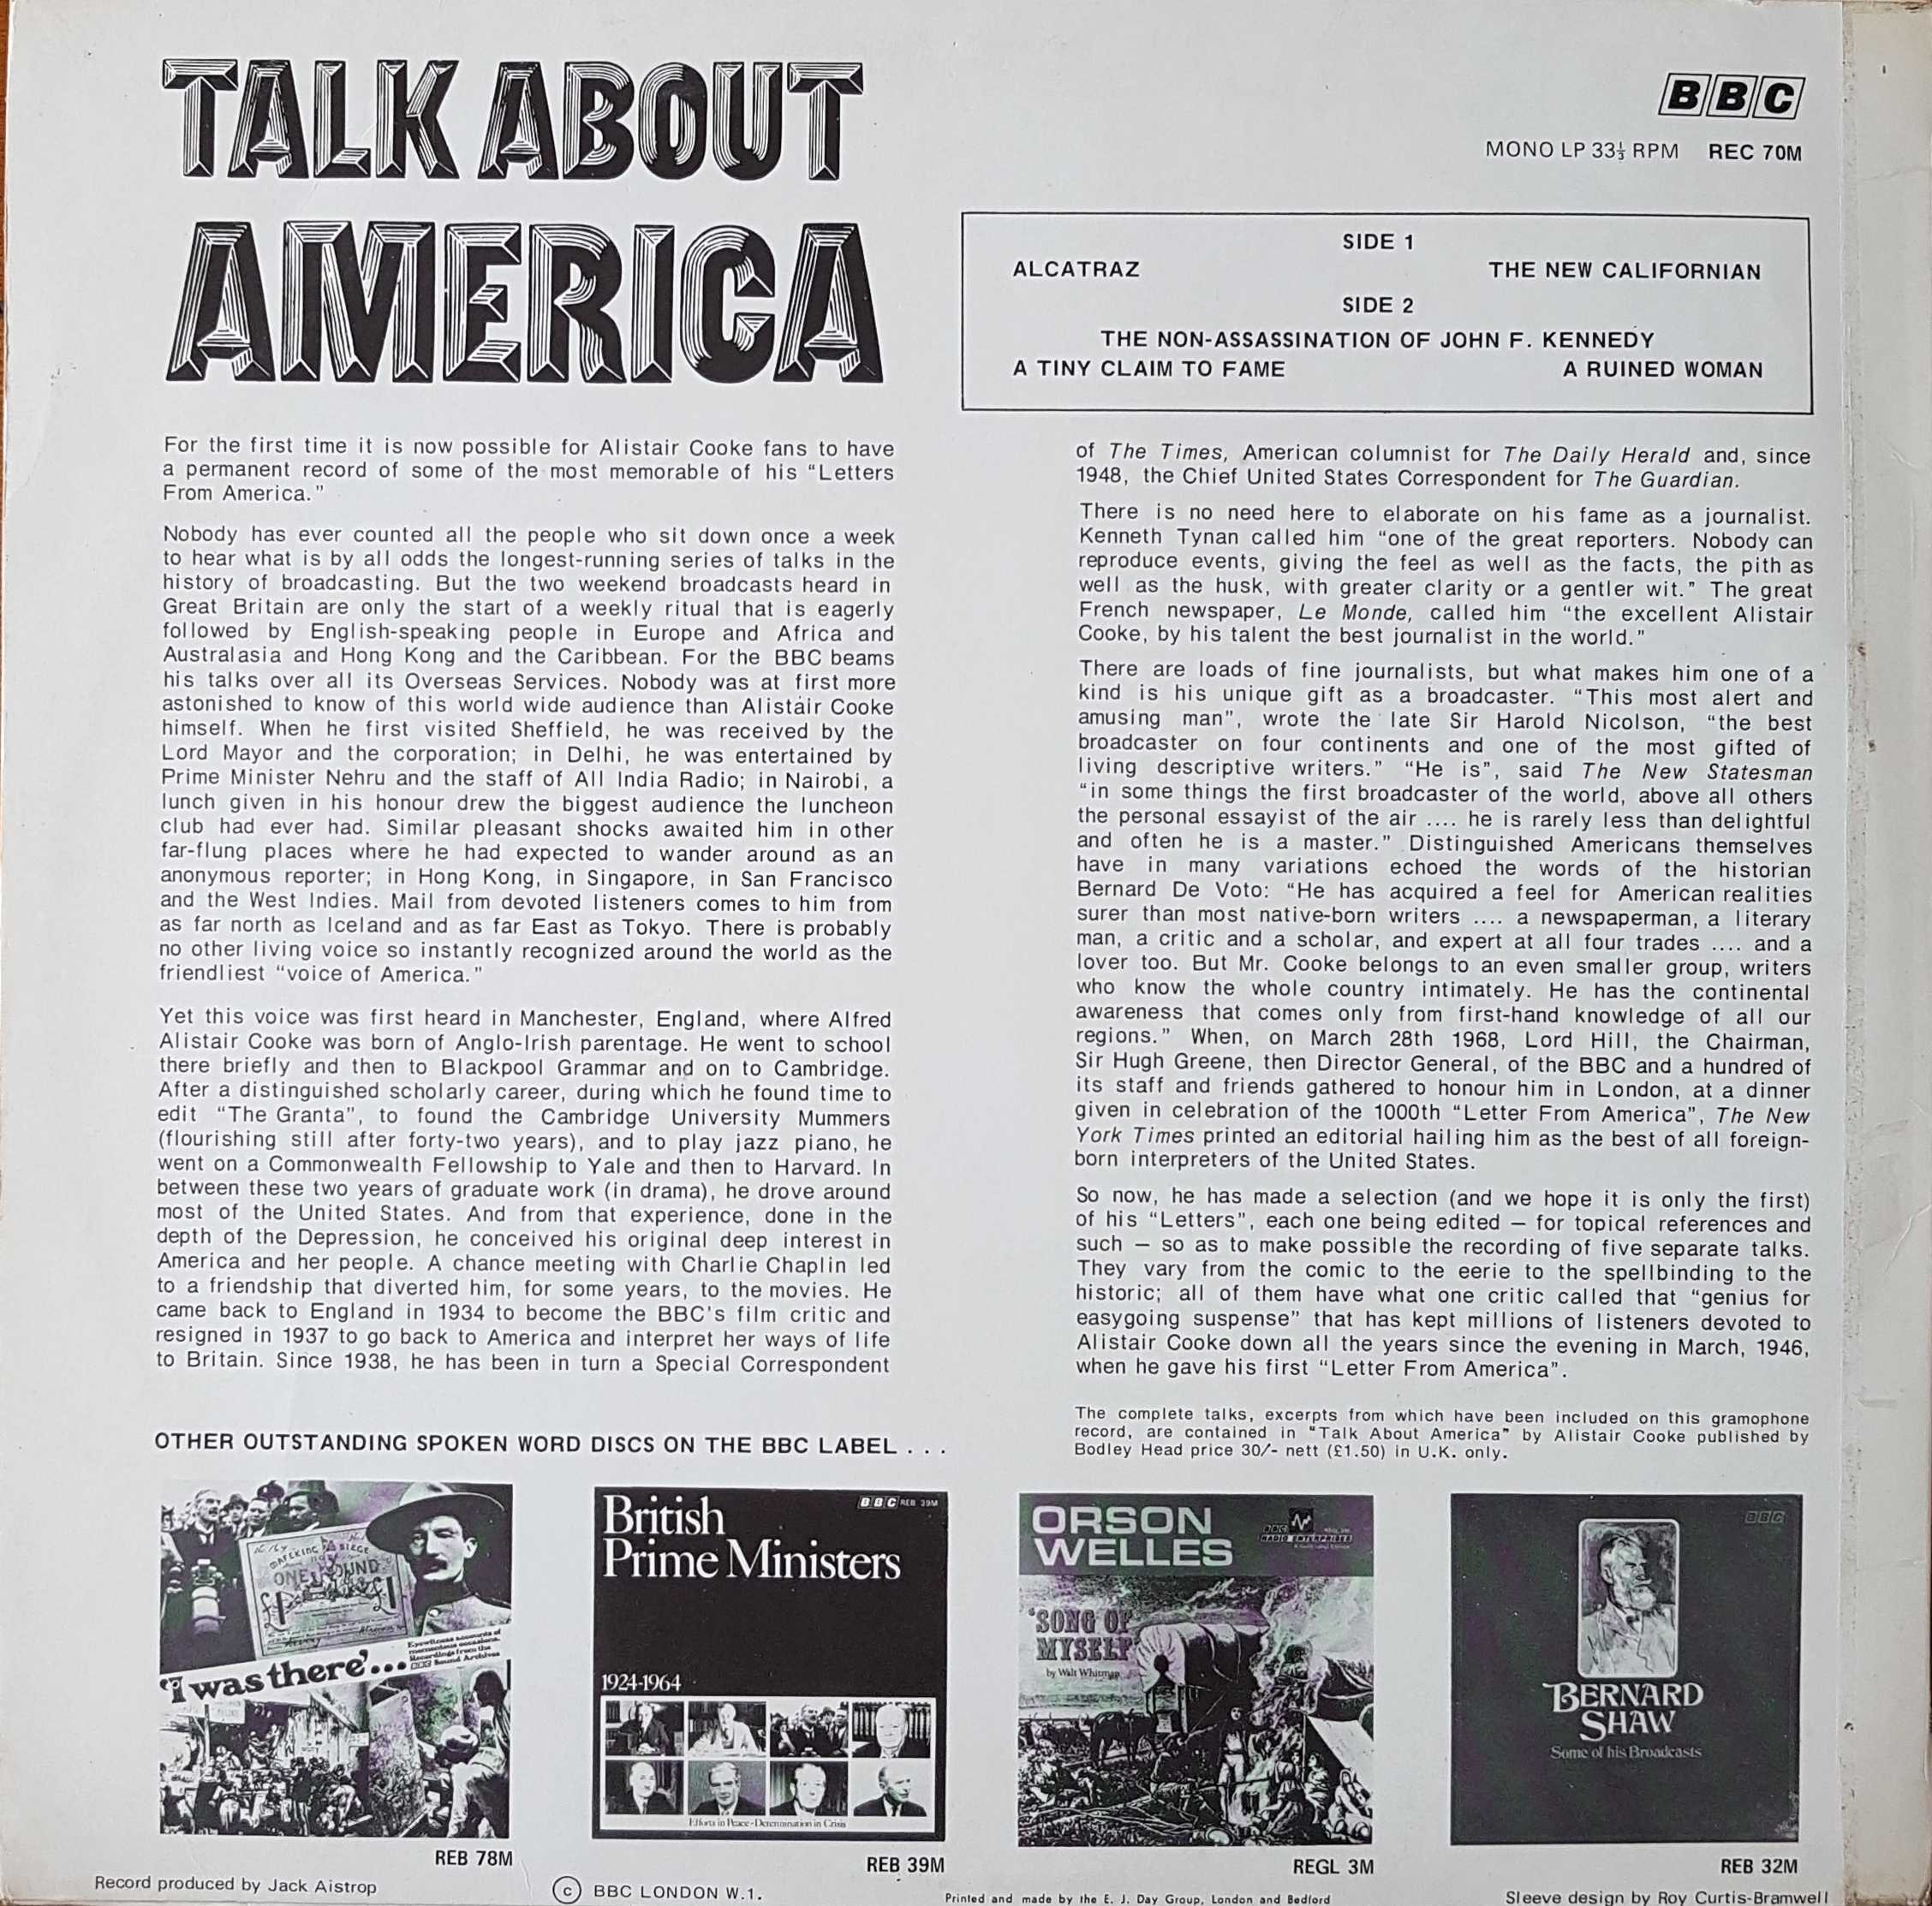 Picture of REC 70 Talk about America by artist Alistair Cooke from the BBC records and Tapes library